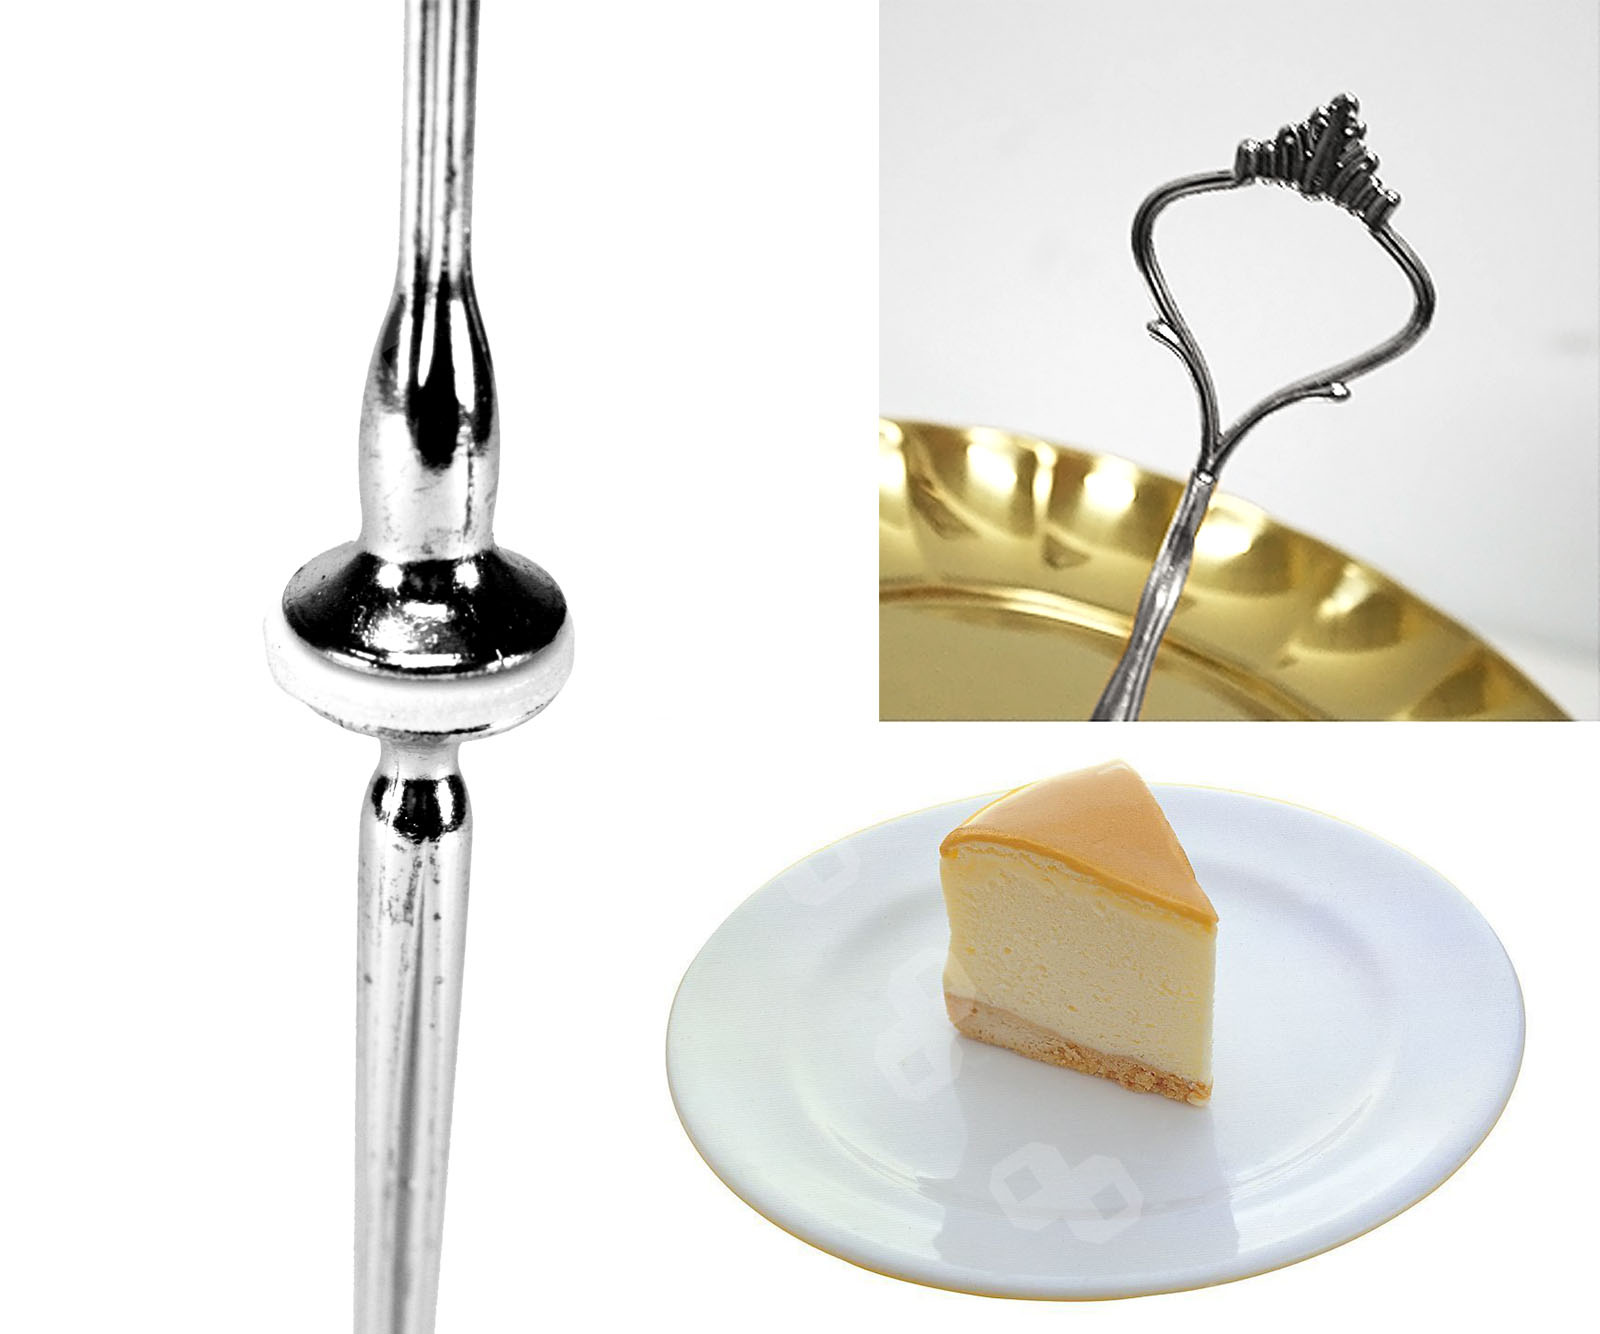  3  Tier  Cake  Plate Center Stand  Handle Rod Support Kit  